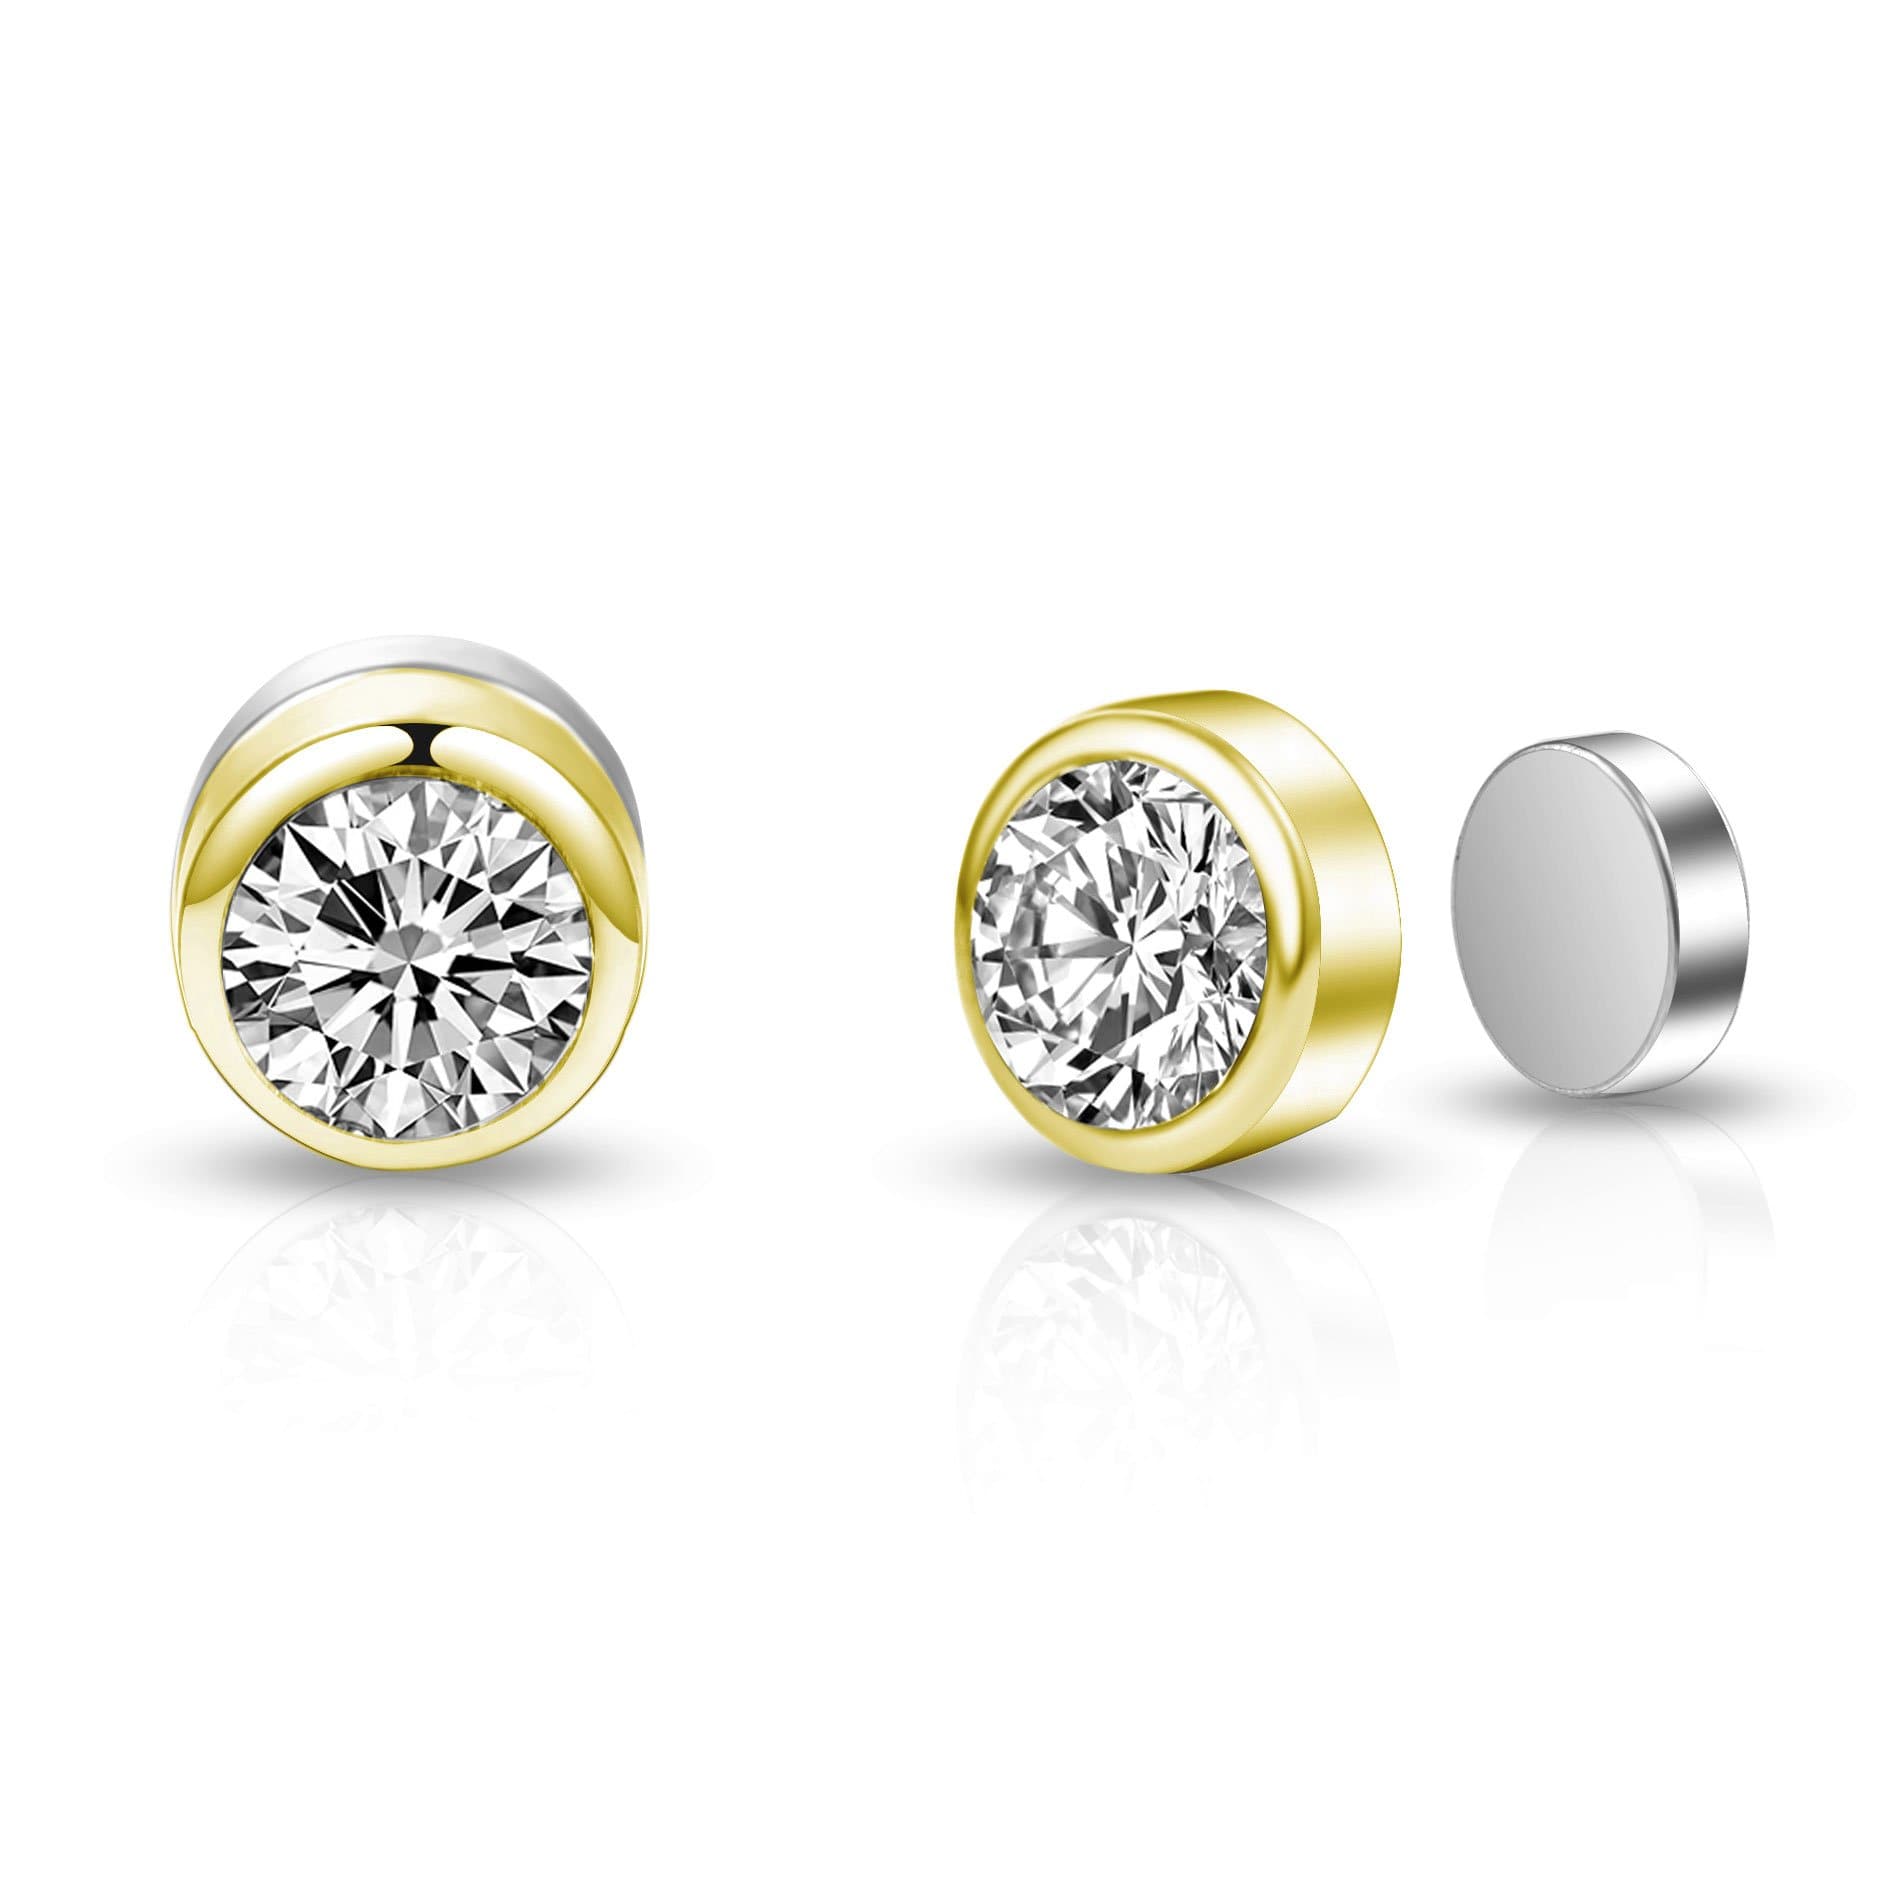 Gold Plated 6mm Magnetic Clip On Earrings Created with Zircondia® Crystals by Philip Jones Jewellery